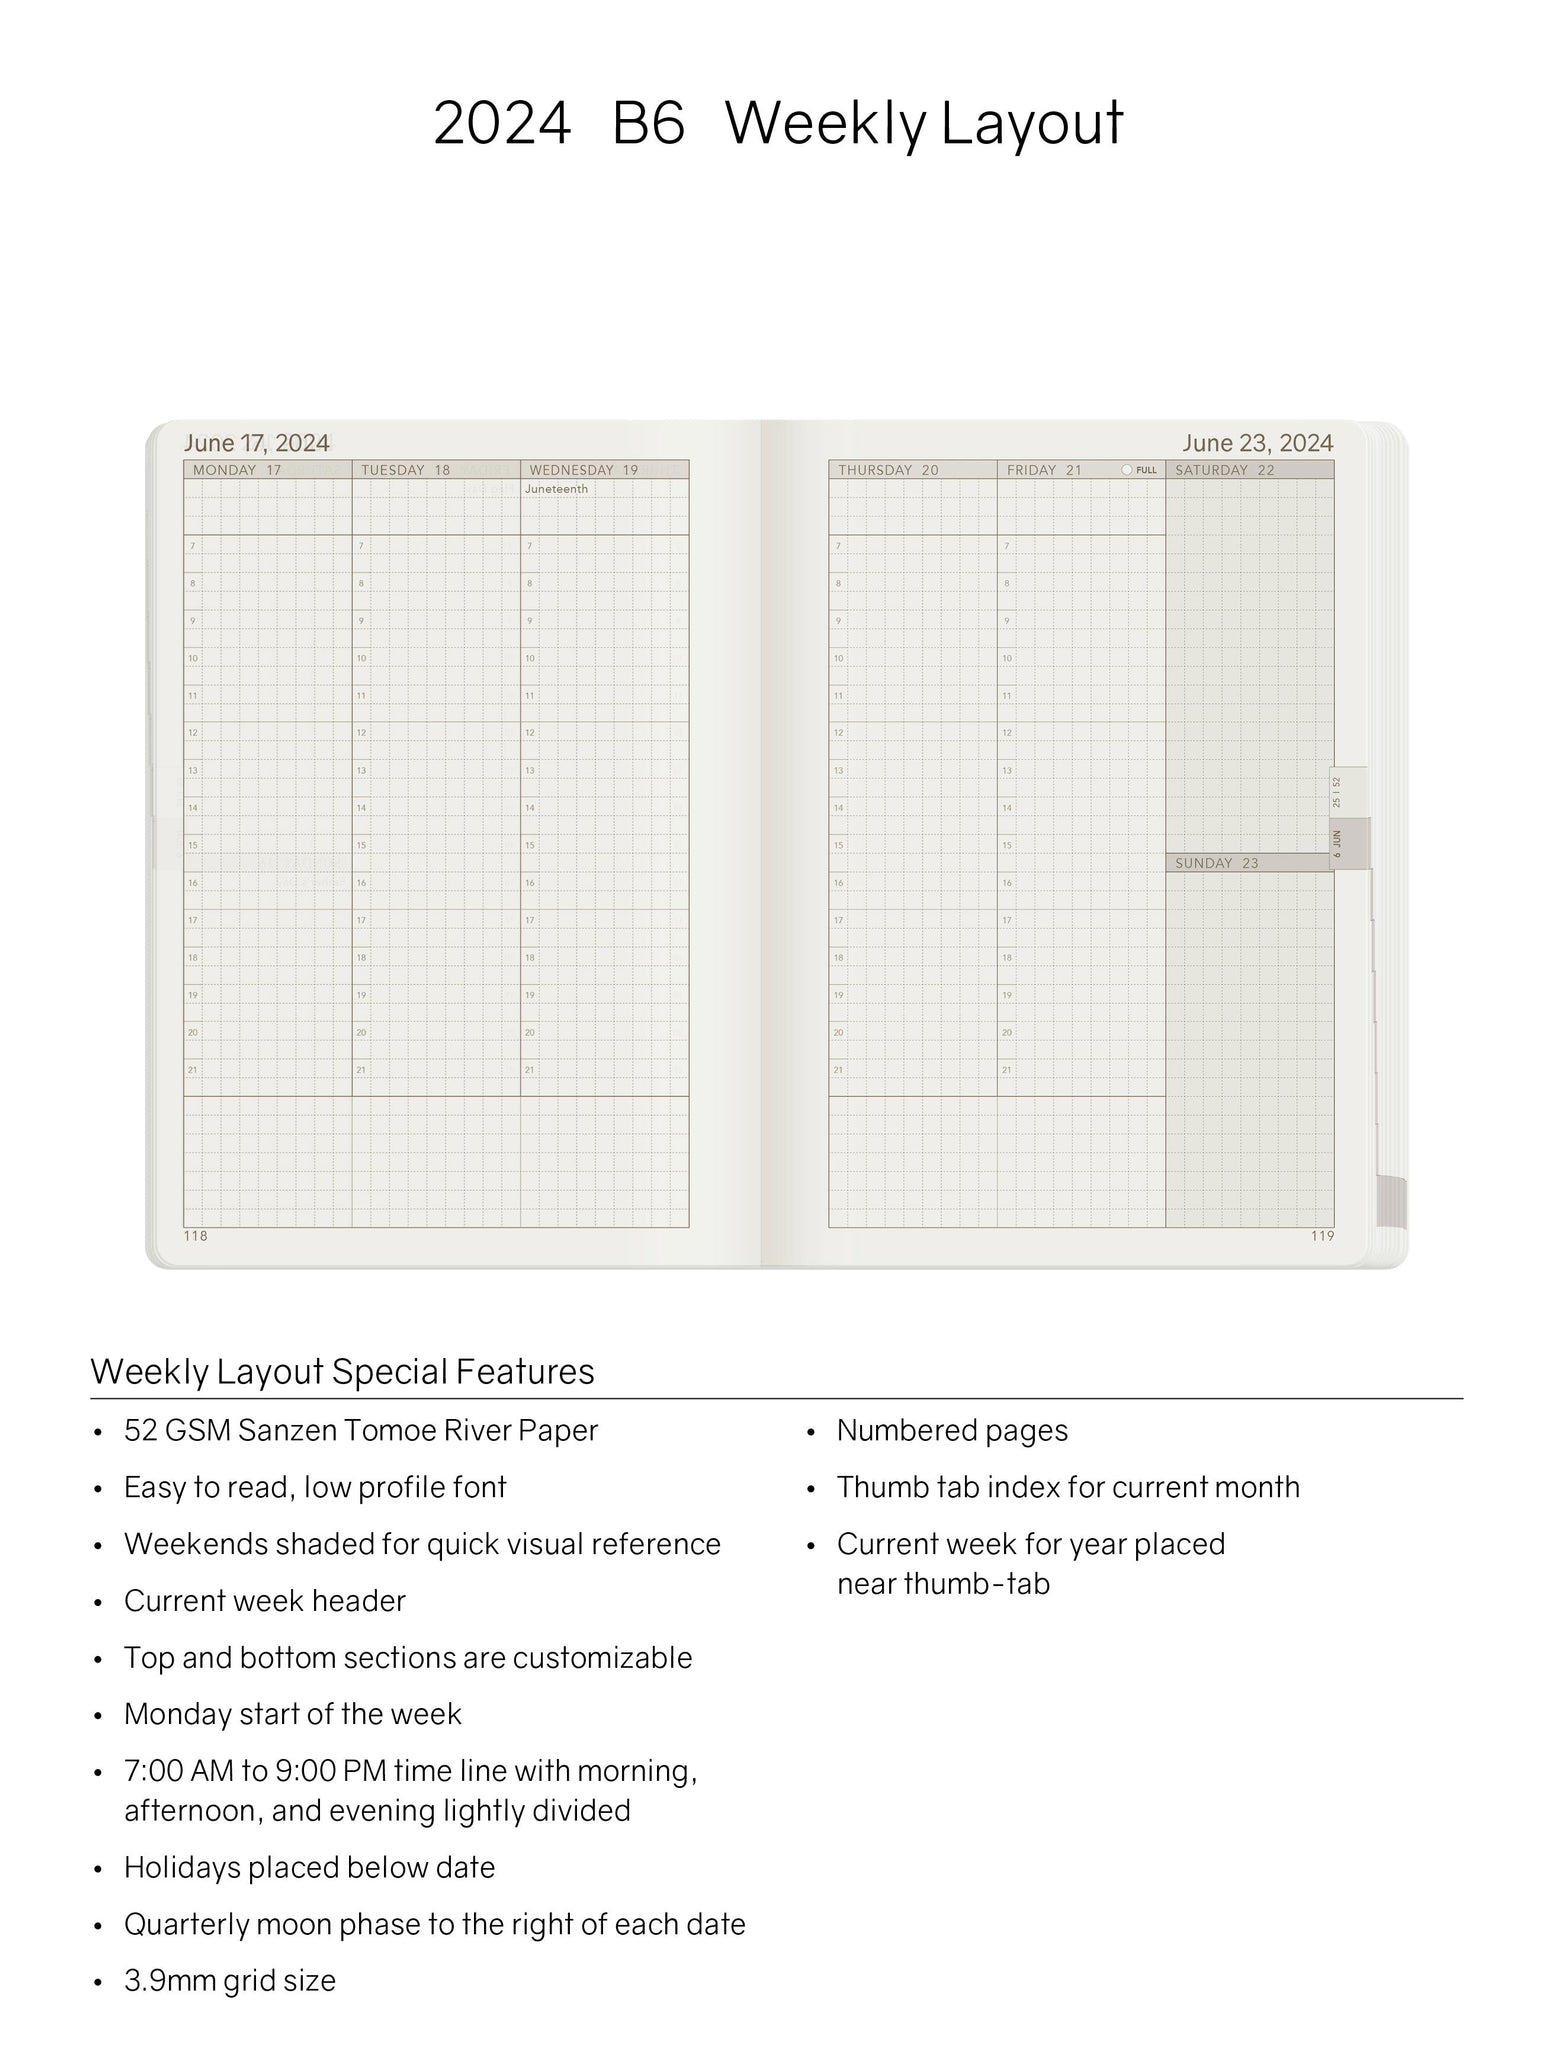 IMPERFECT | 2024 B6 Weekly Planner - 52gsm Tomoe River Paper (All in One)